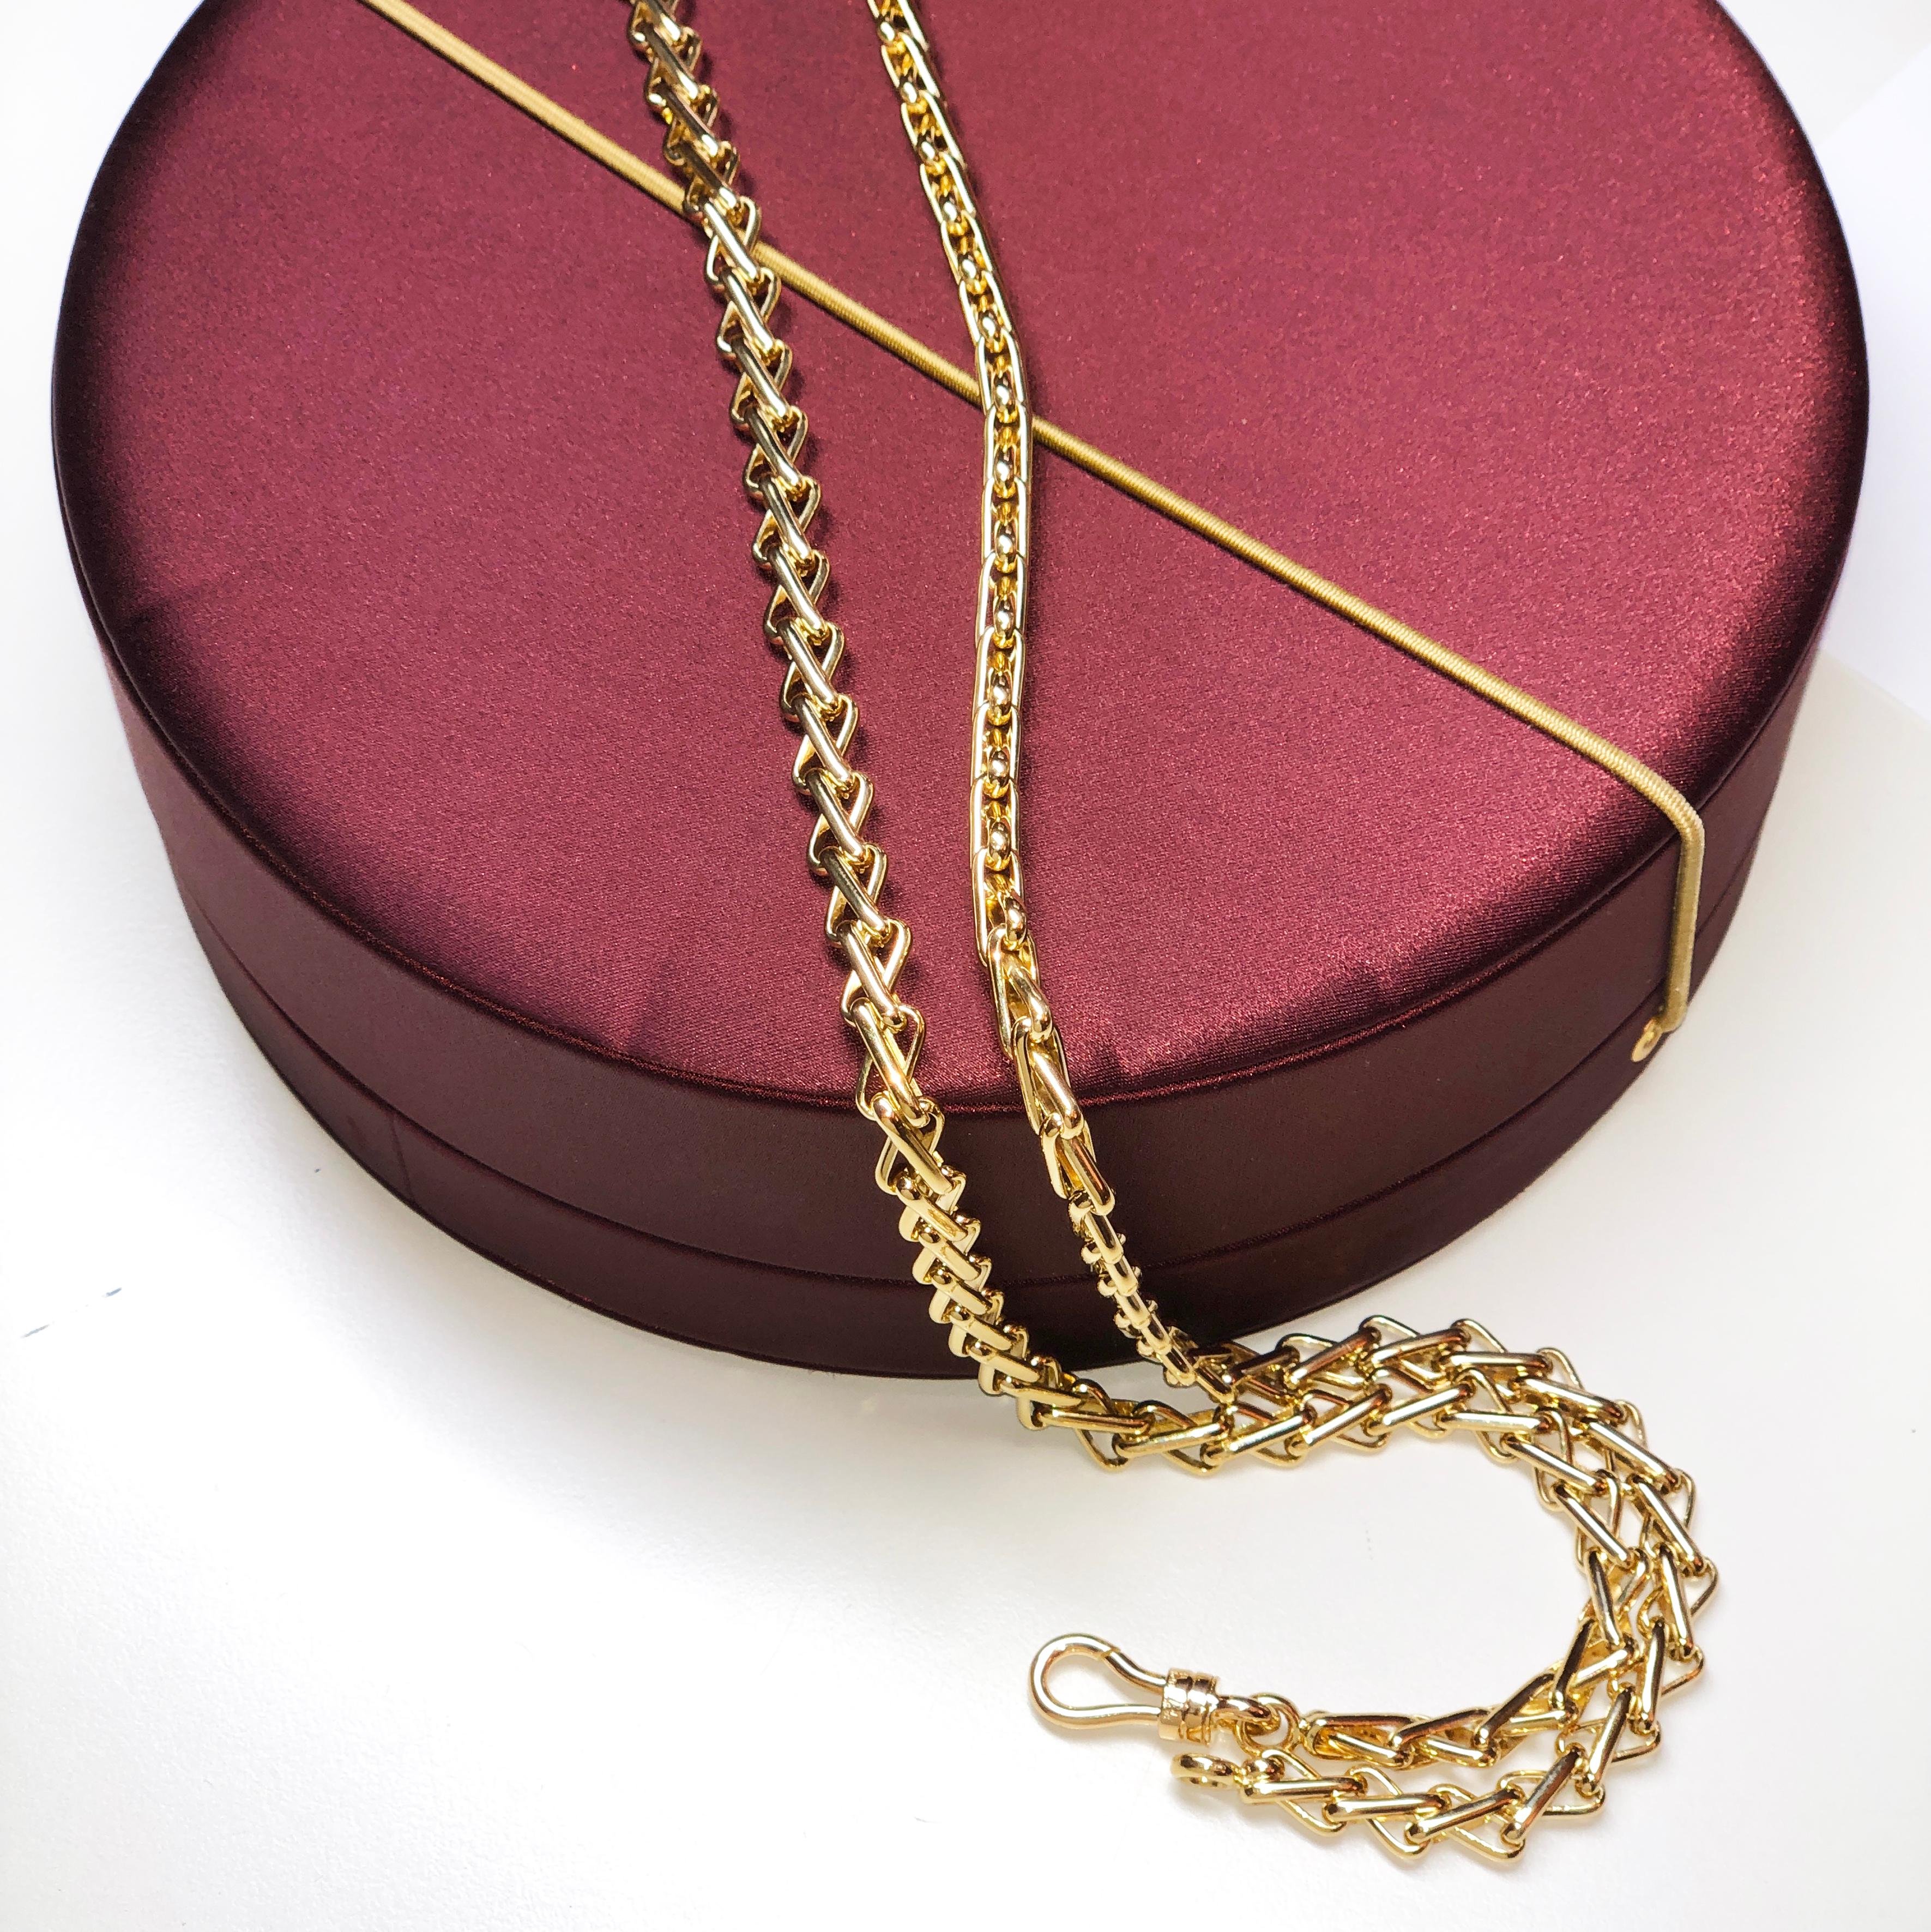 Original 1980 One-of-a-Kind Pomellato 18K Solid Yellow Gold Long Chain Necklace 5